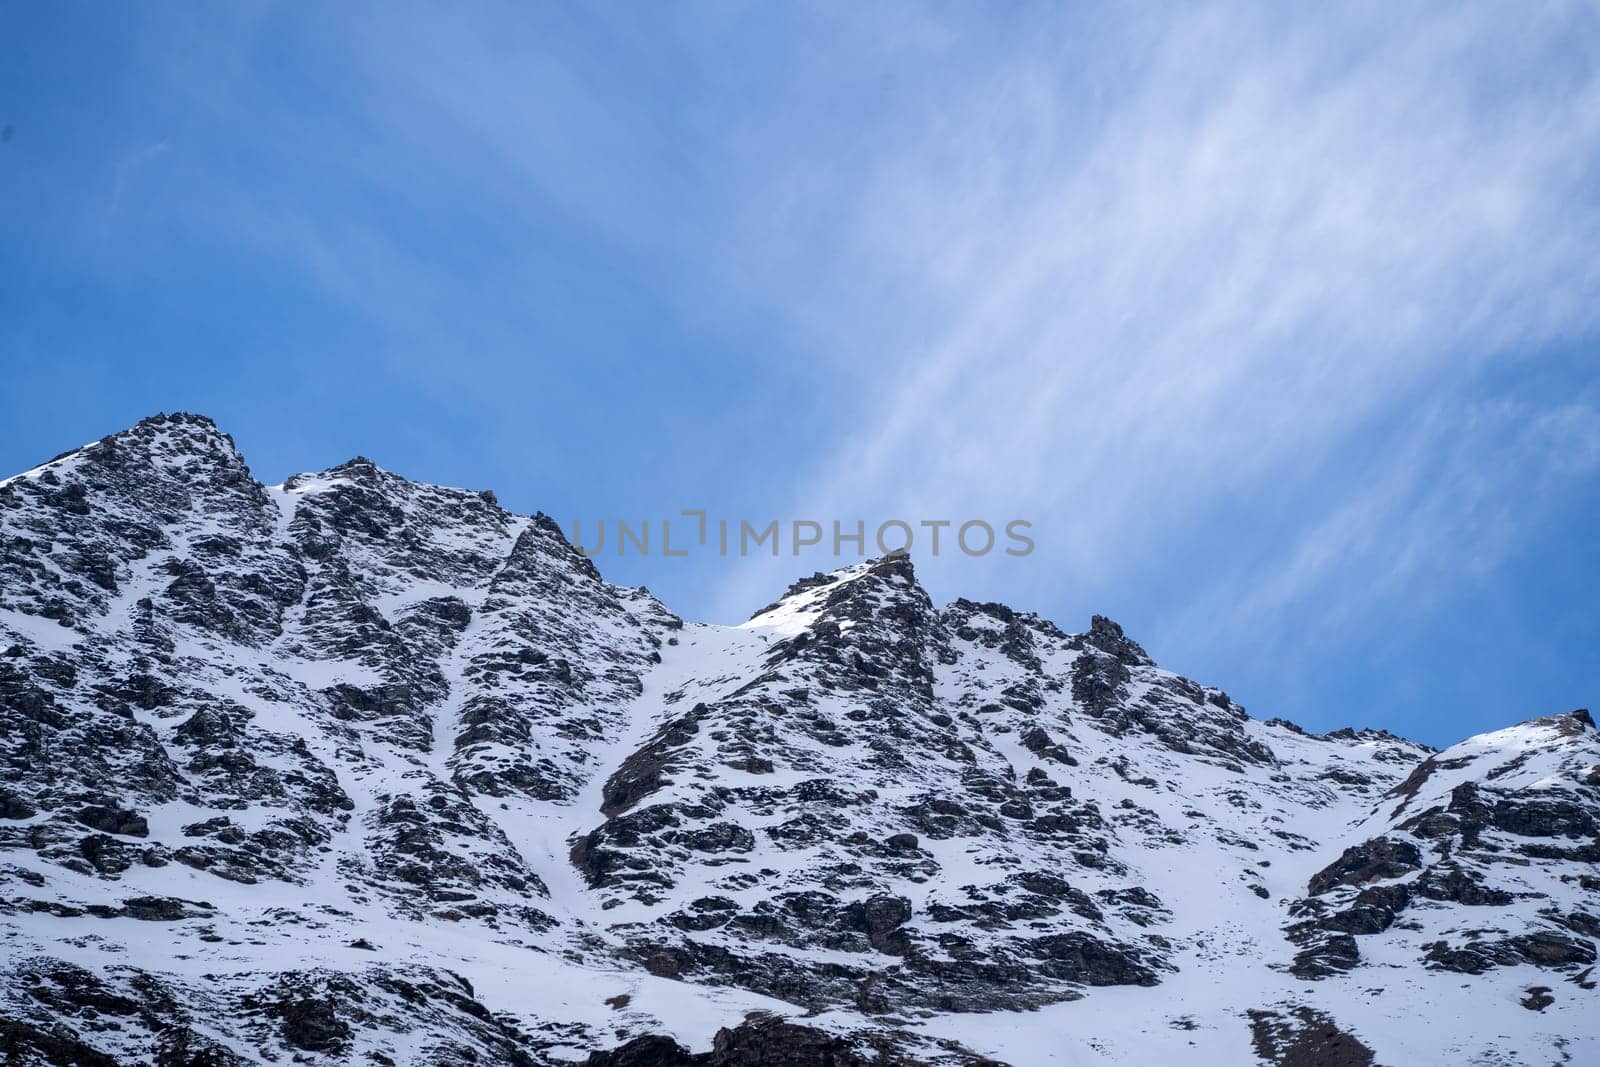 white wispy clouds moving over snow covered rocky himalaya mountains in spiti valley on the way to leh in manali himachal pradesh showing popular tourist place by Shalinimathur